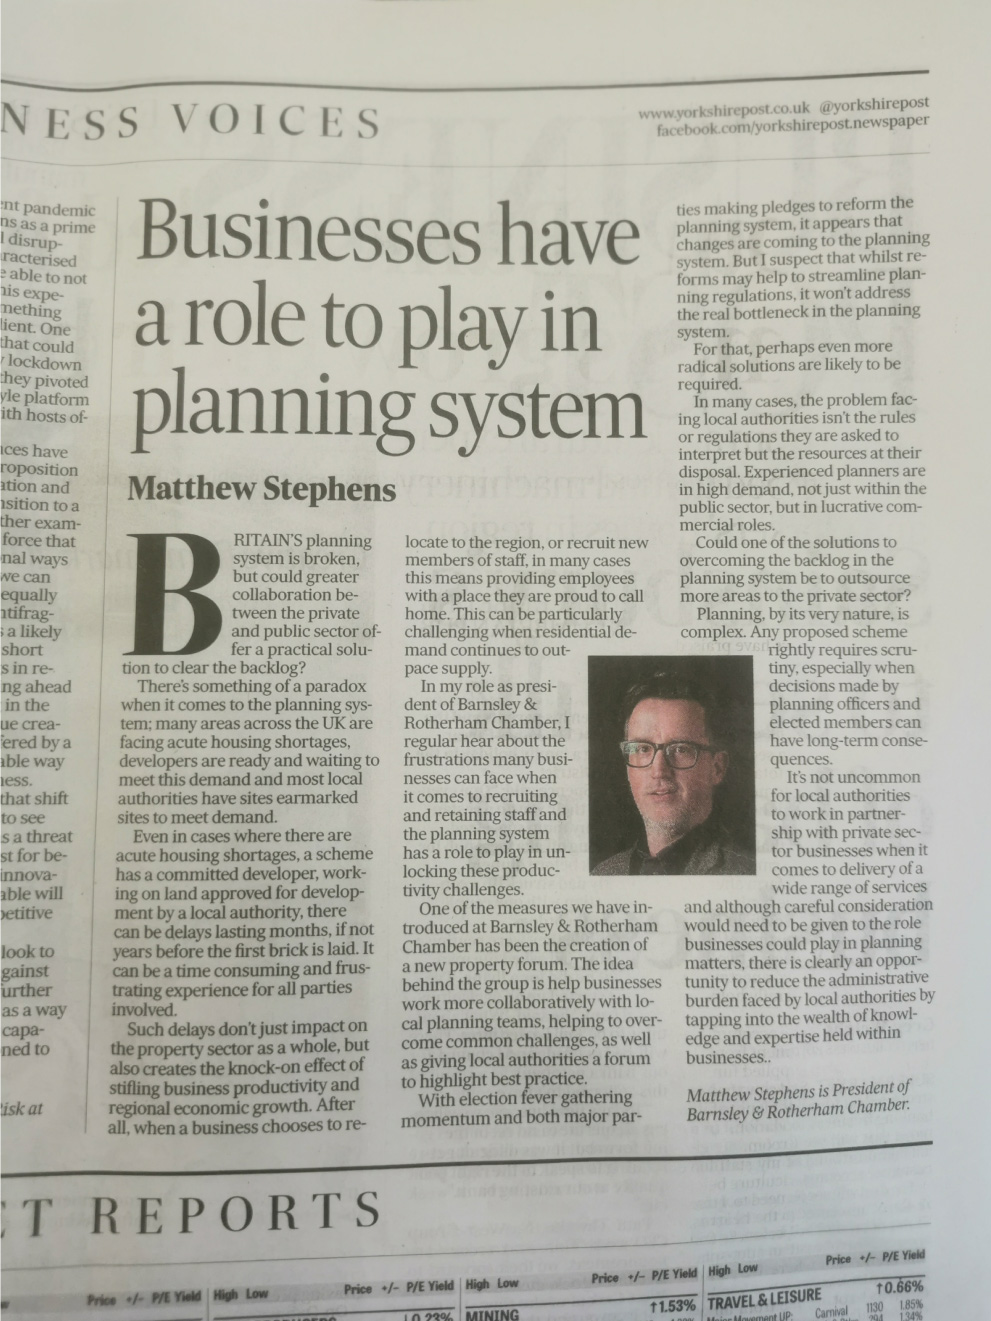 Businesses have a role to play in planning system